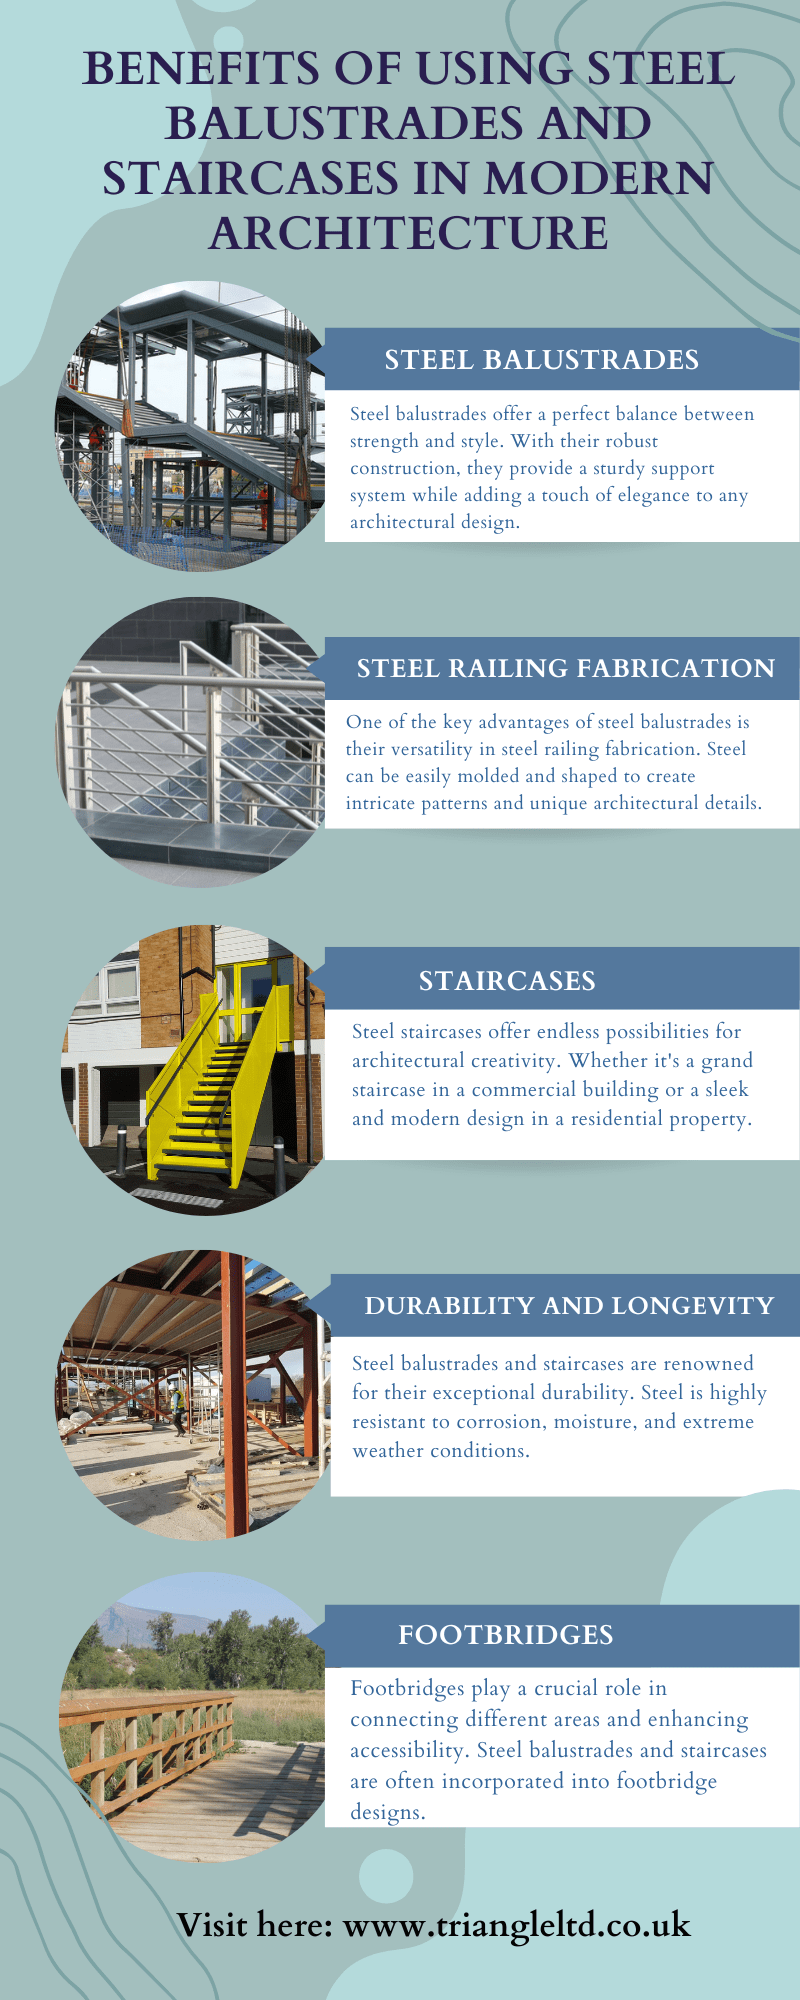 Benefits of Using Steel Balustrades and Staircases in Modern Architecture hosted at ImgBB — ImgBB